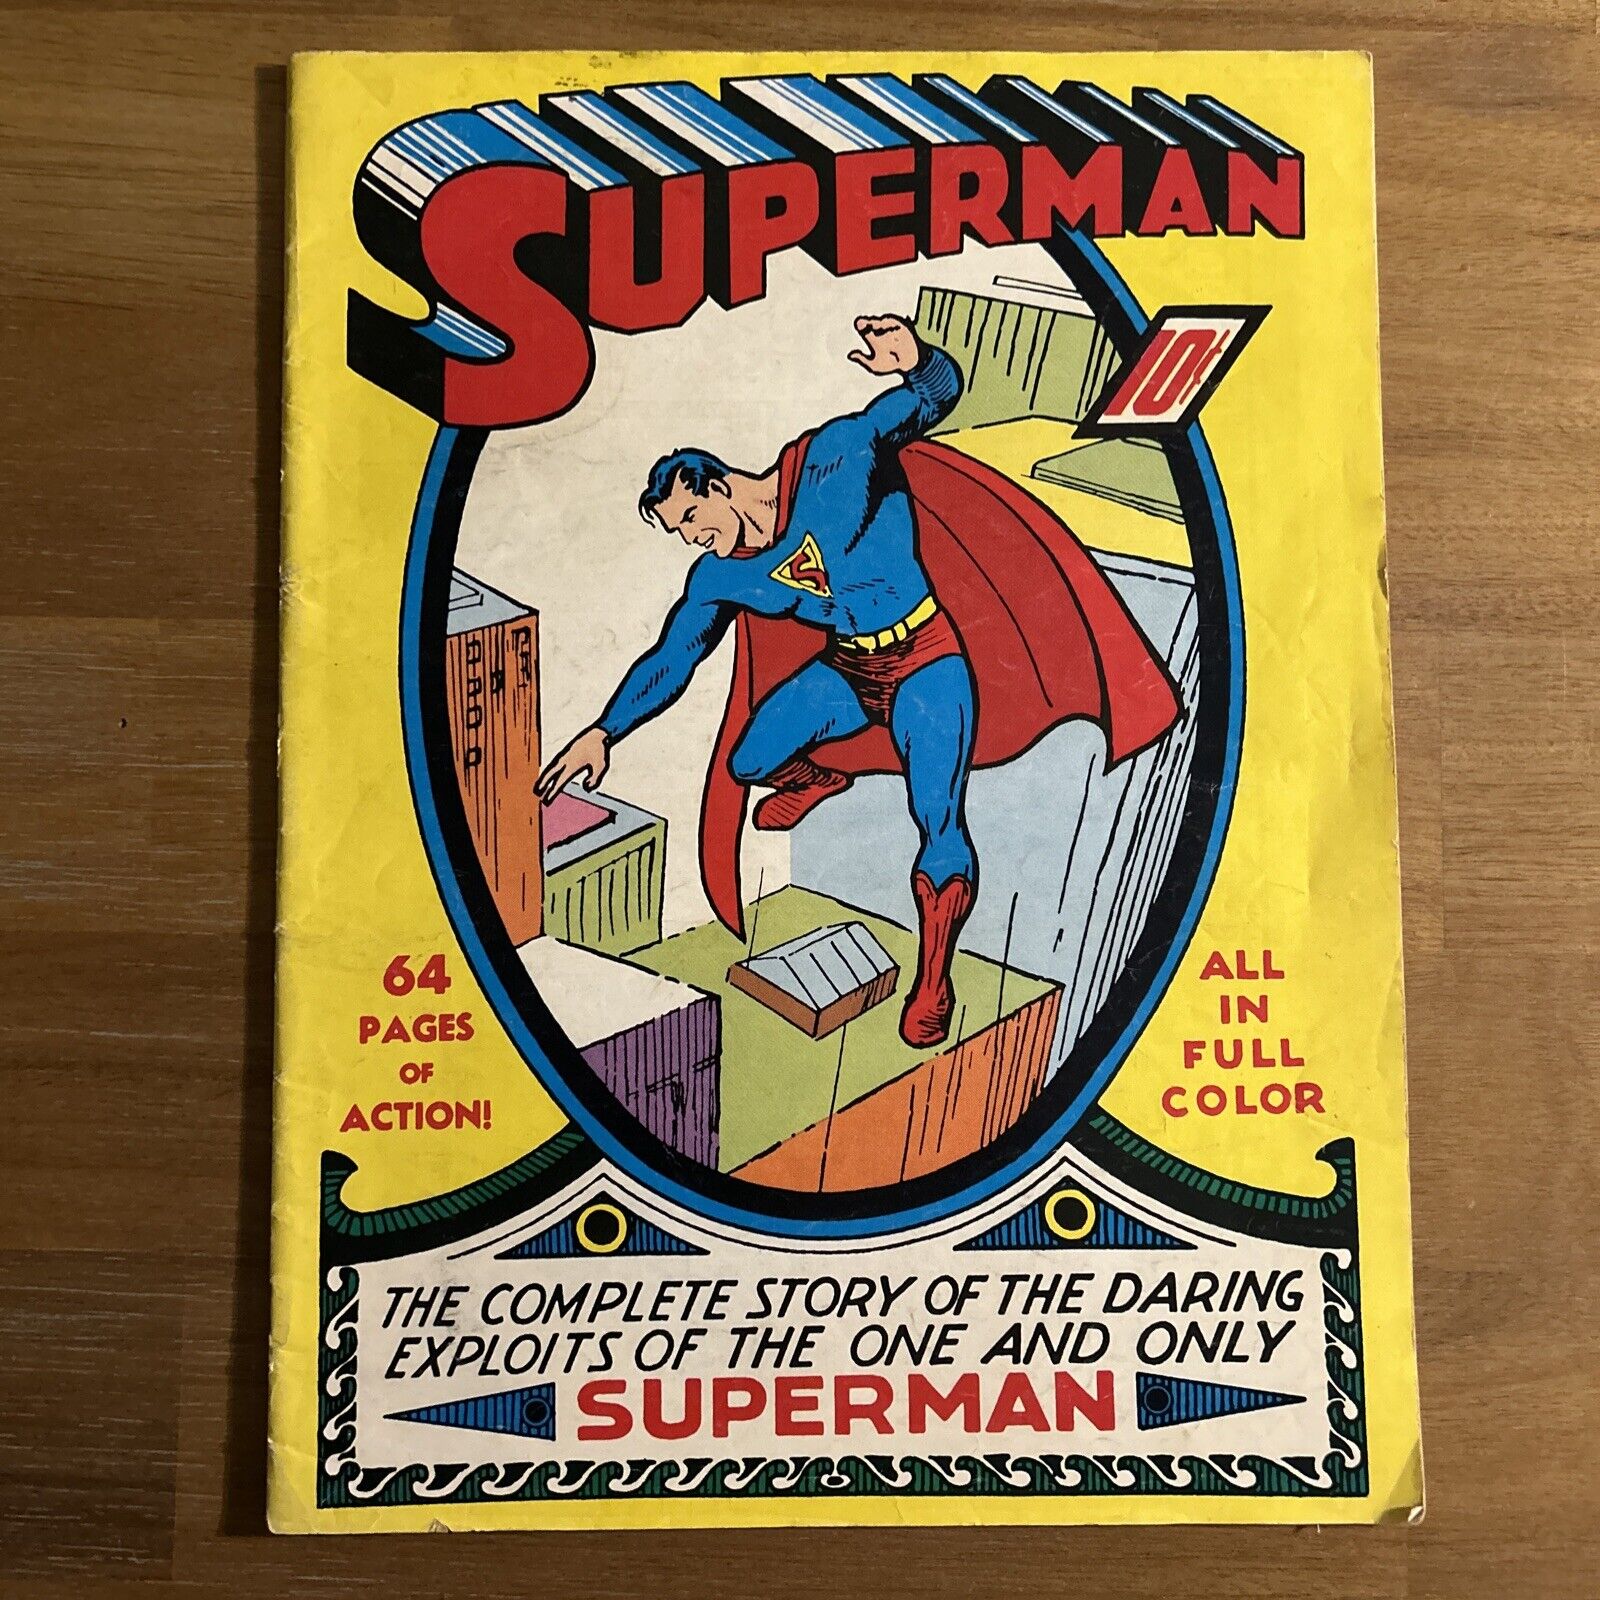 Superman #1 1939 64 Pages Of Action The One And Only Superman 10C Large Format